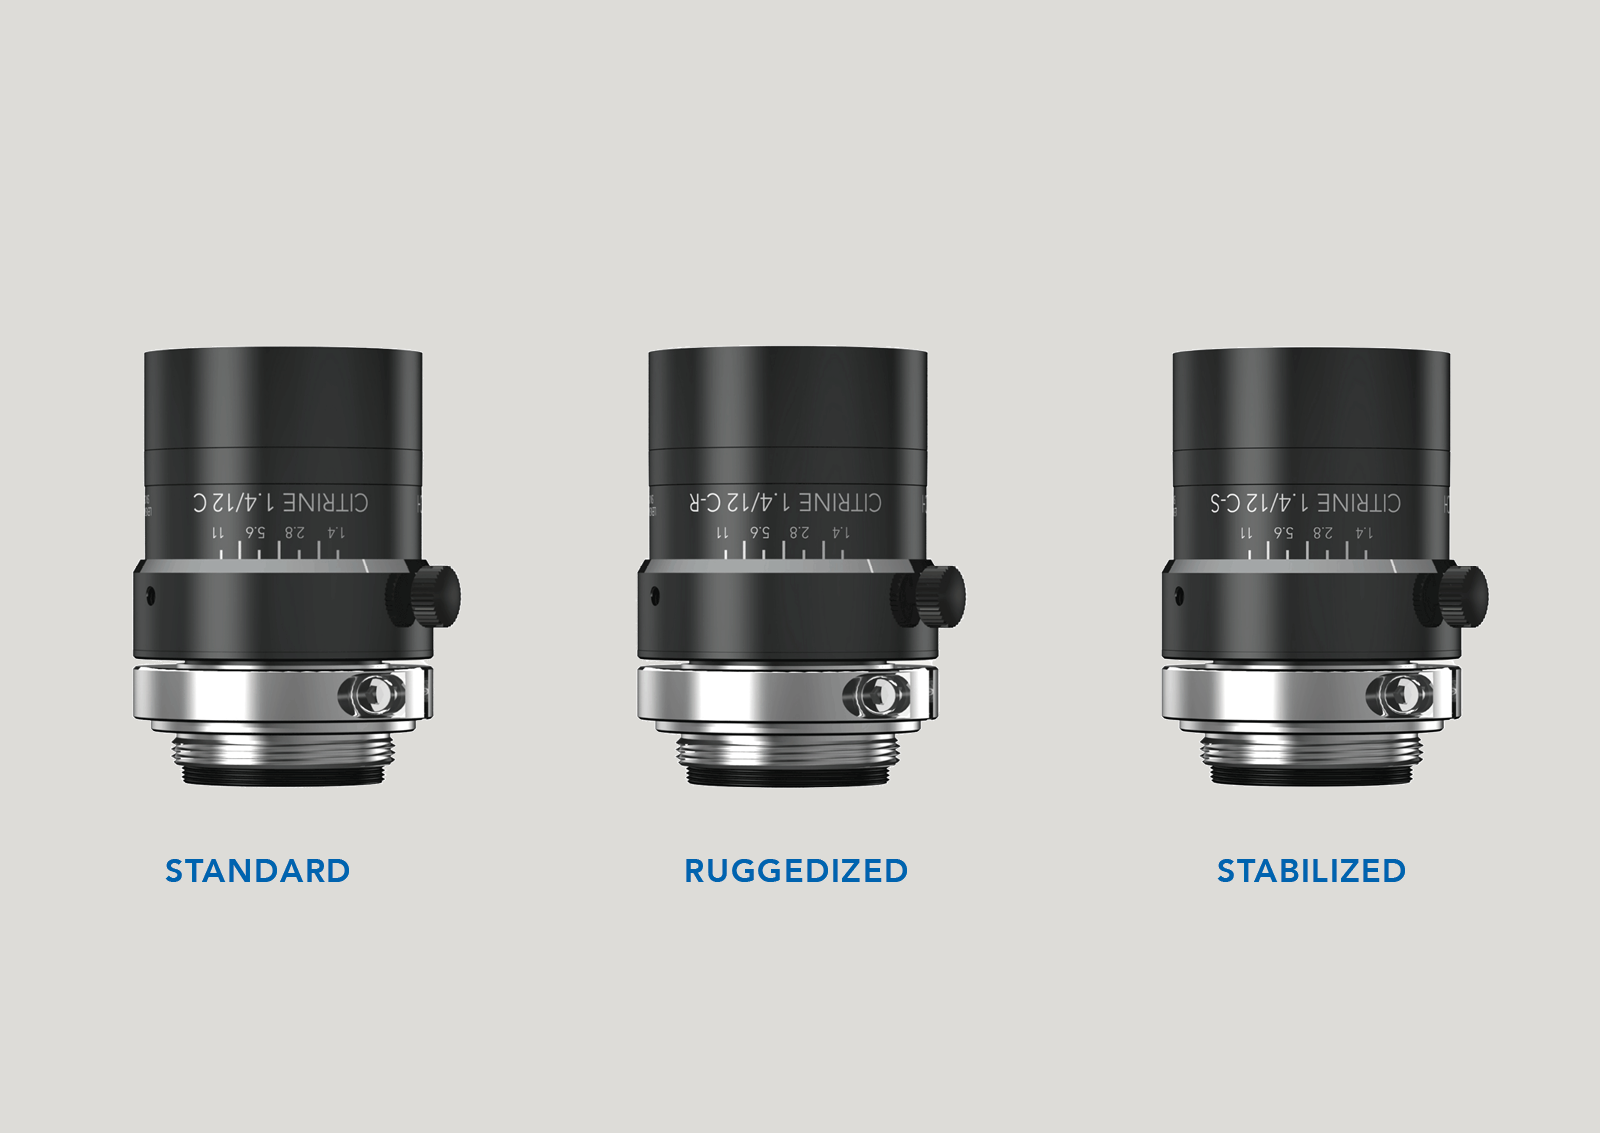 Ruggedized and stabilized lenses